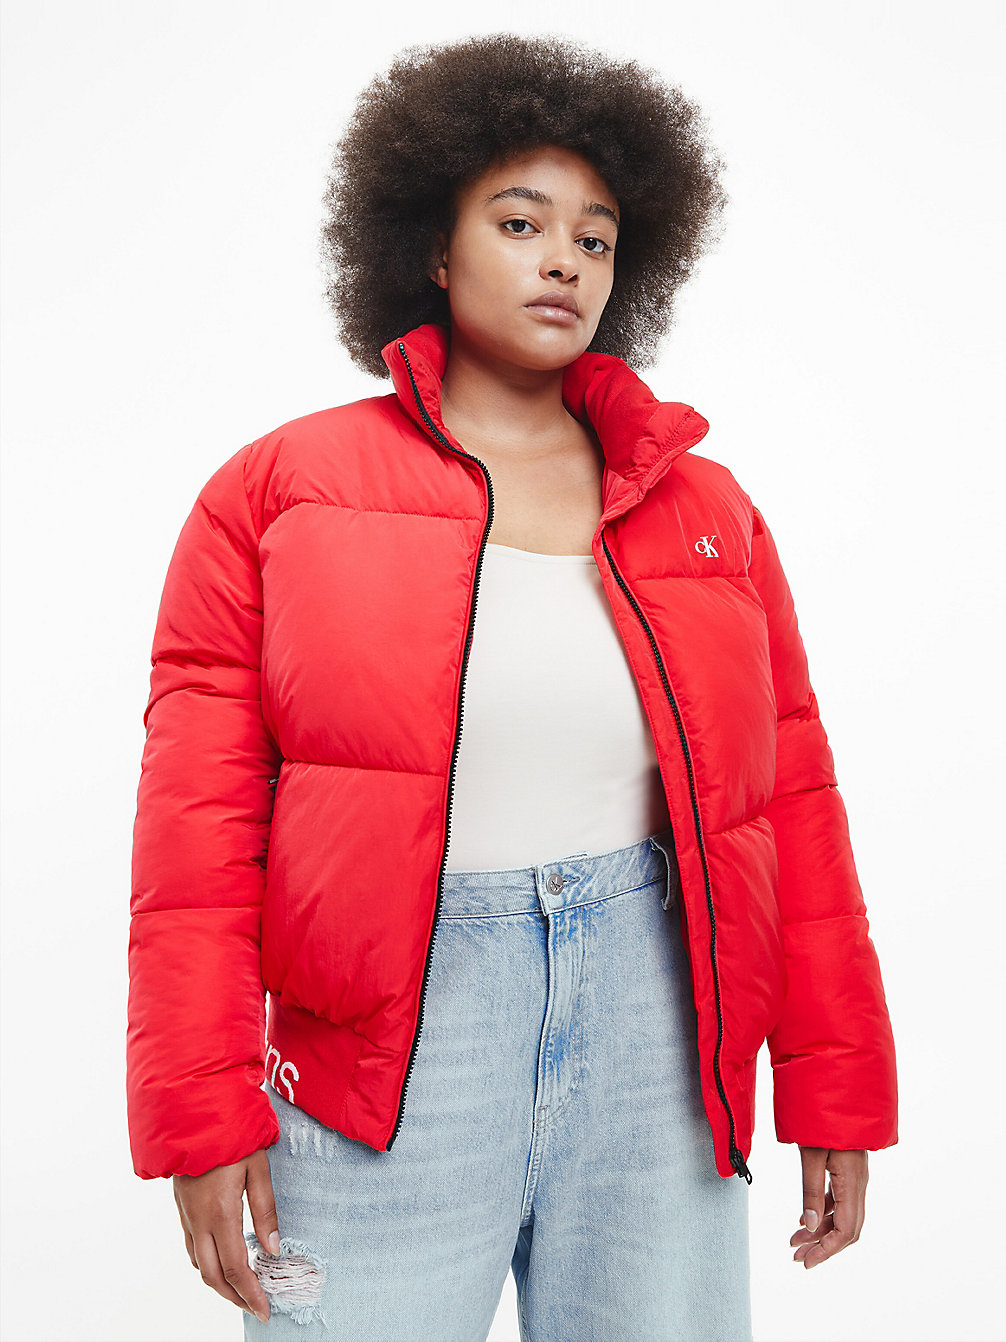 CANDY APPLE Plus Size Recycled Nylon Bomber Jacket undefined women Calvin Klein